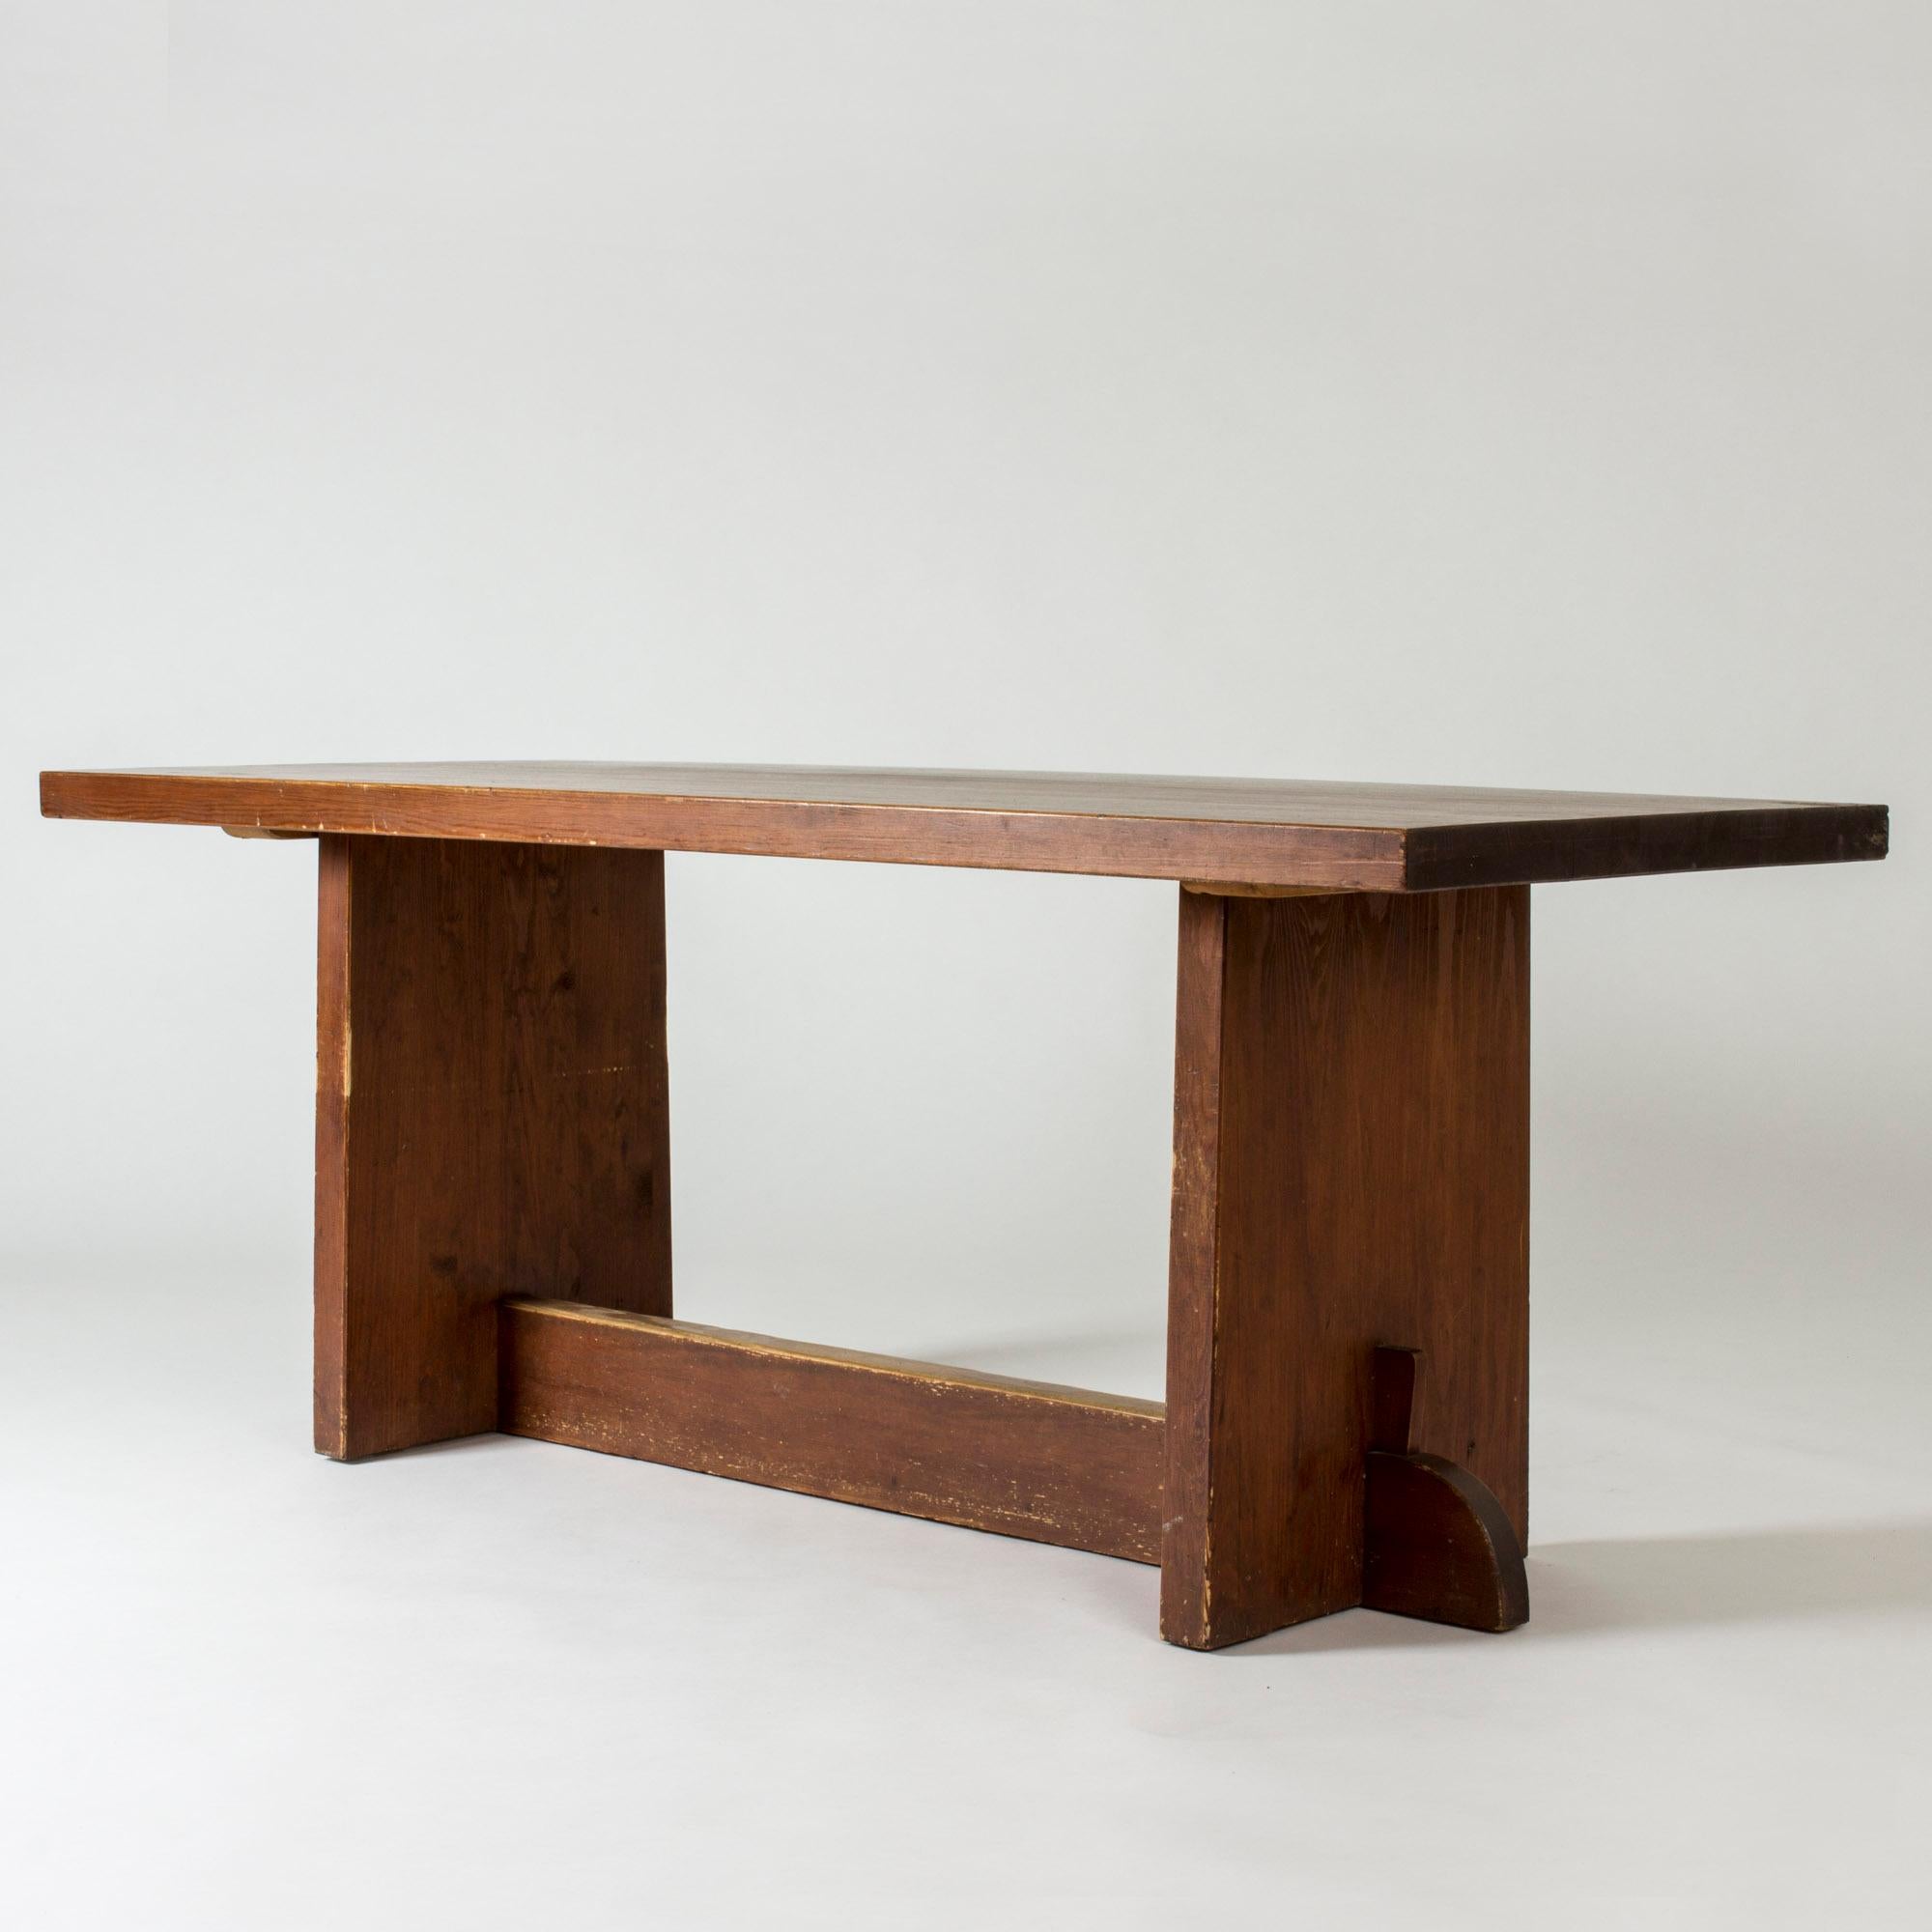 “Lovö” dining table by Axel Einar Hjorth, made from solid pine in a clean, rustic design. Stained darker brown.